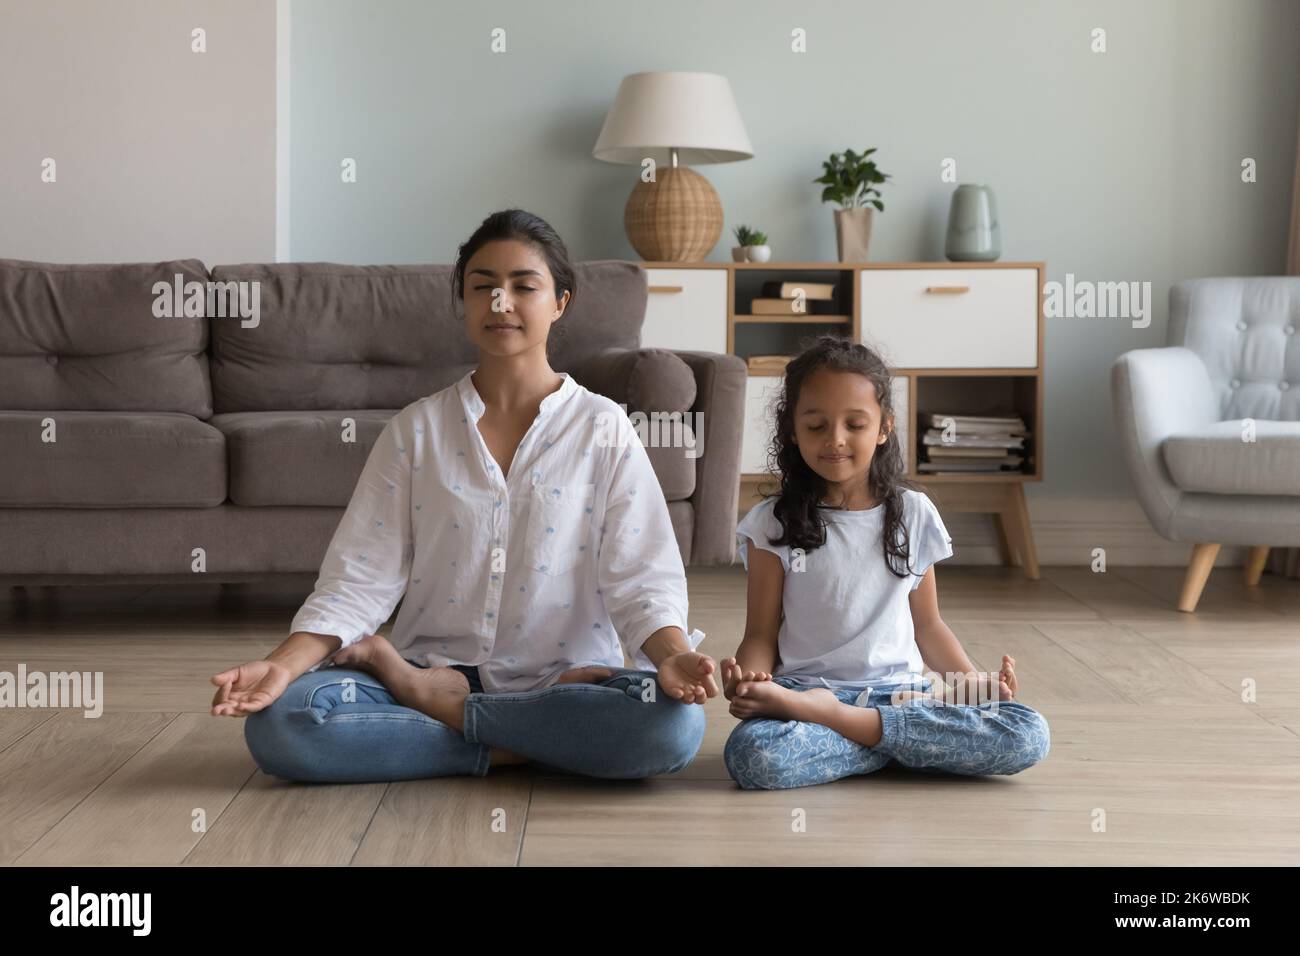 Silent Indian woman and preschooler daughter meditating seated indoors Stock Photo